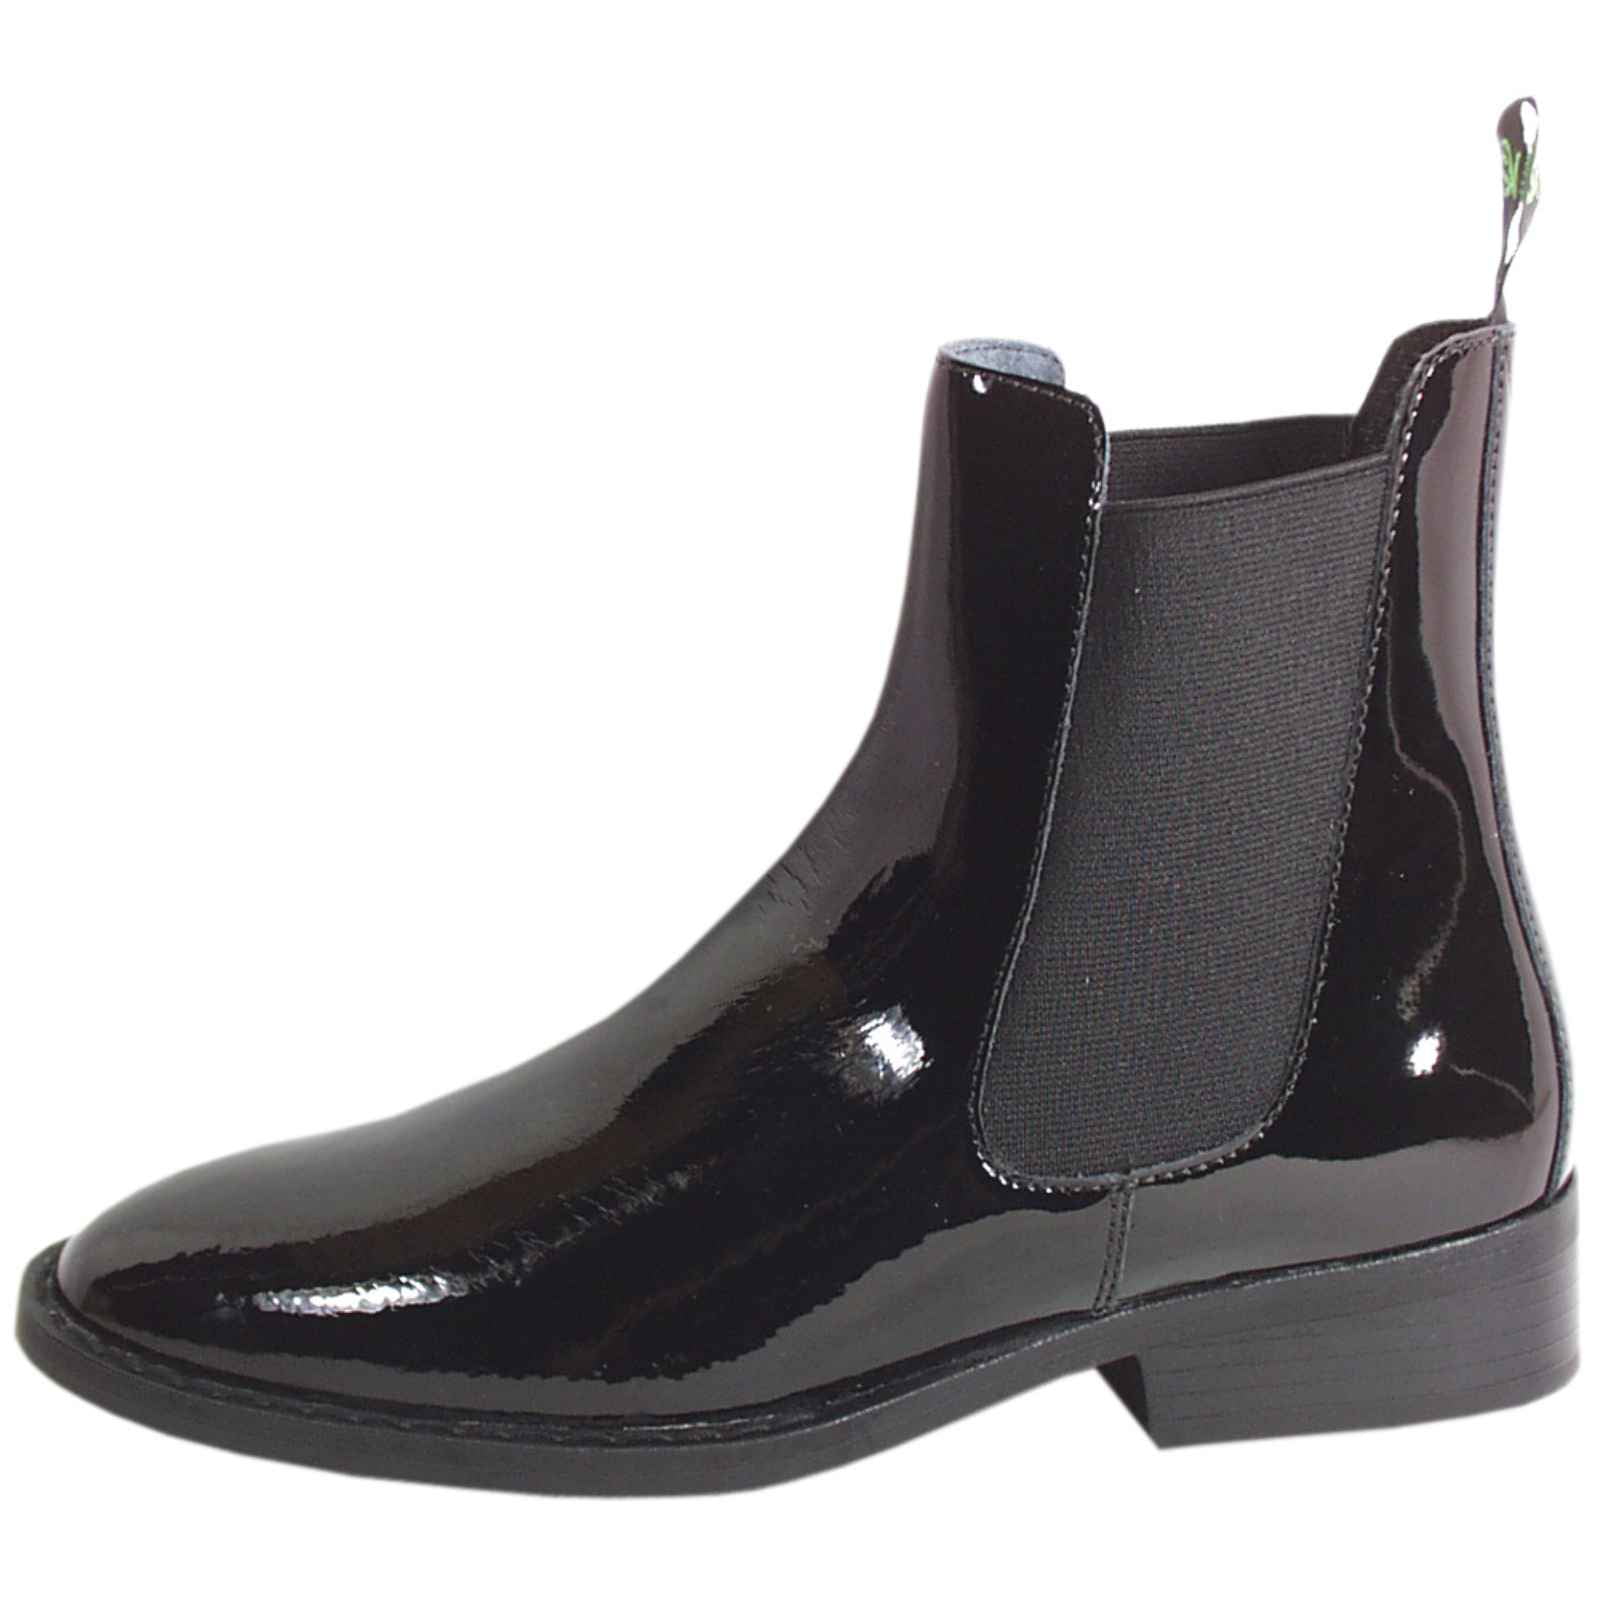 patent leather paddock boots